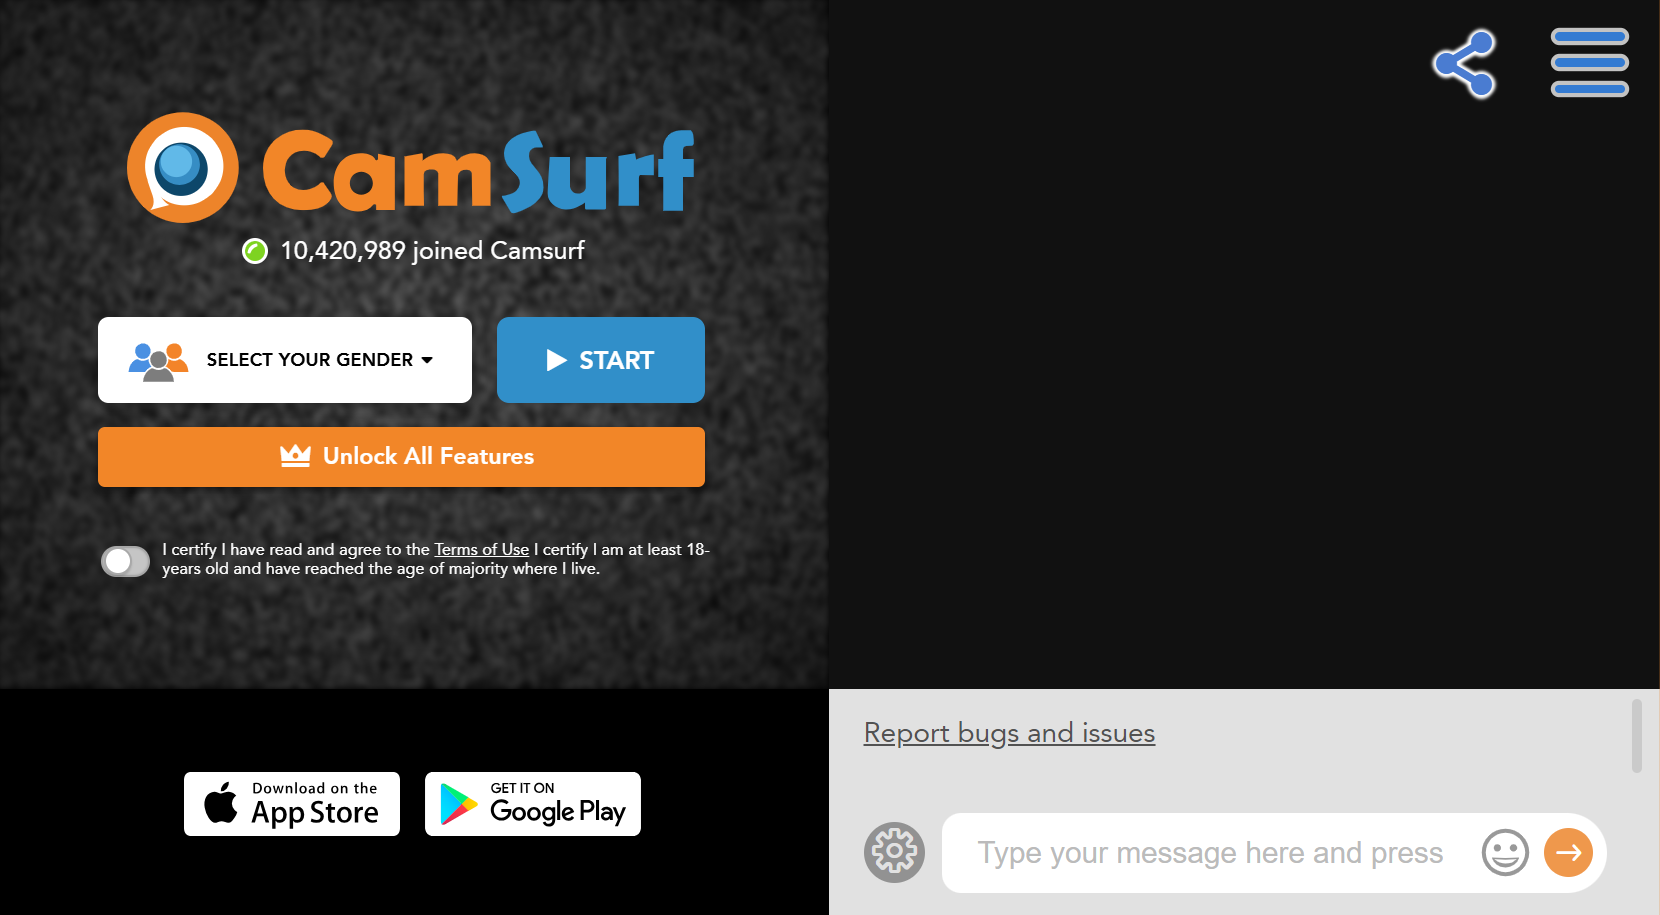 Camsurf's homepage.